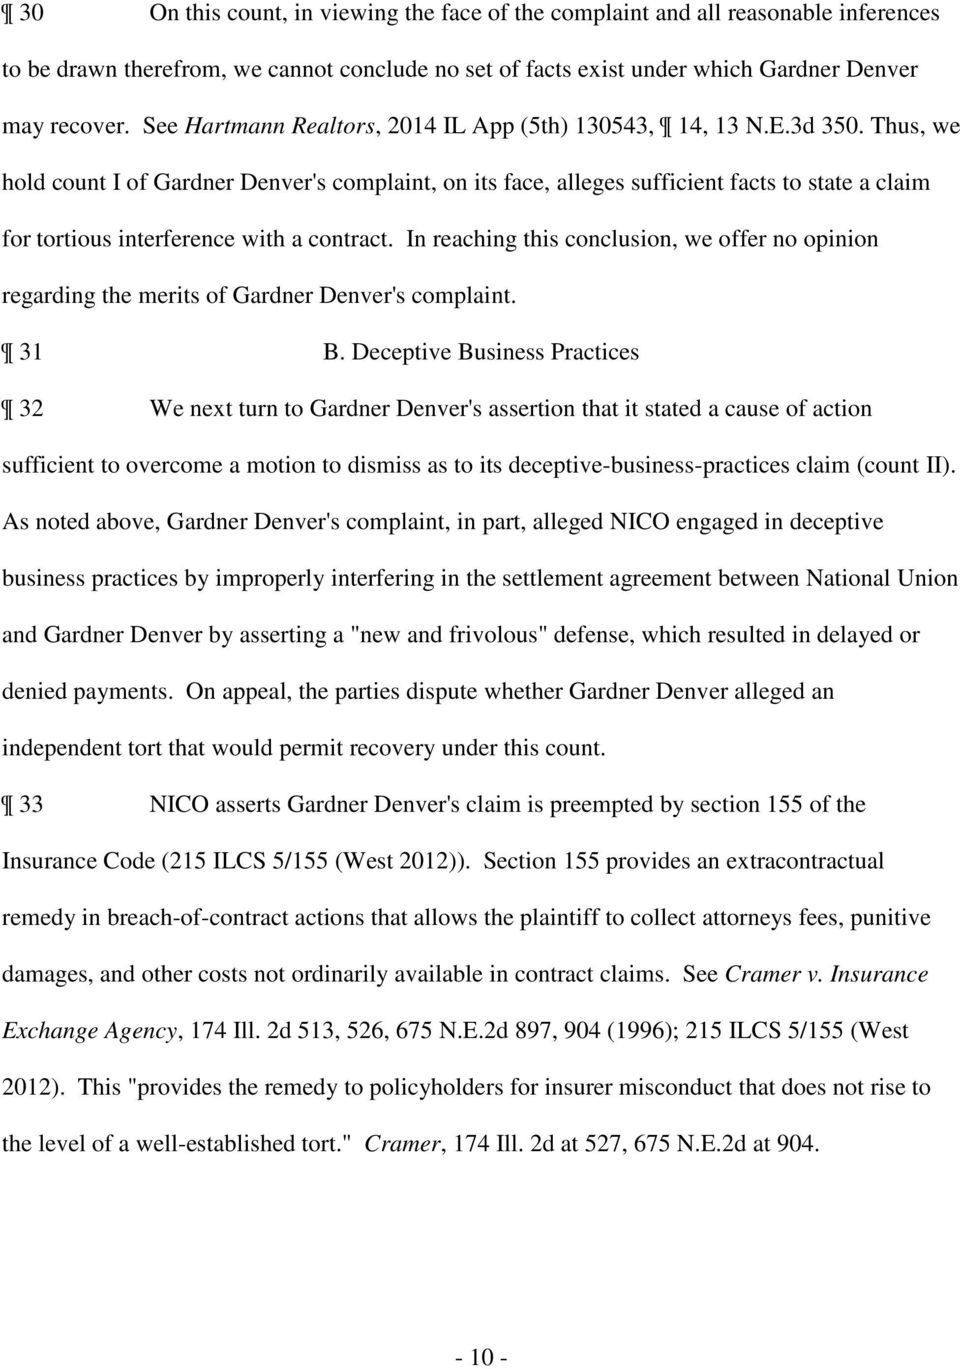 Thus, we hold count I of Gardner Denver's complaint, on its face, alleges sufficient facts to state a claim for tortious interference with a contract.